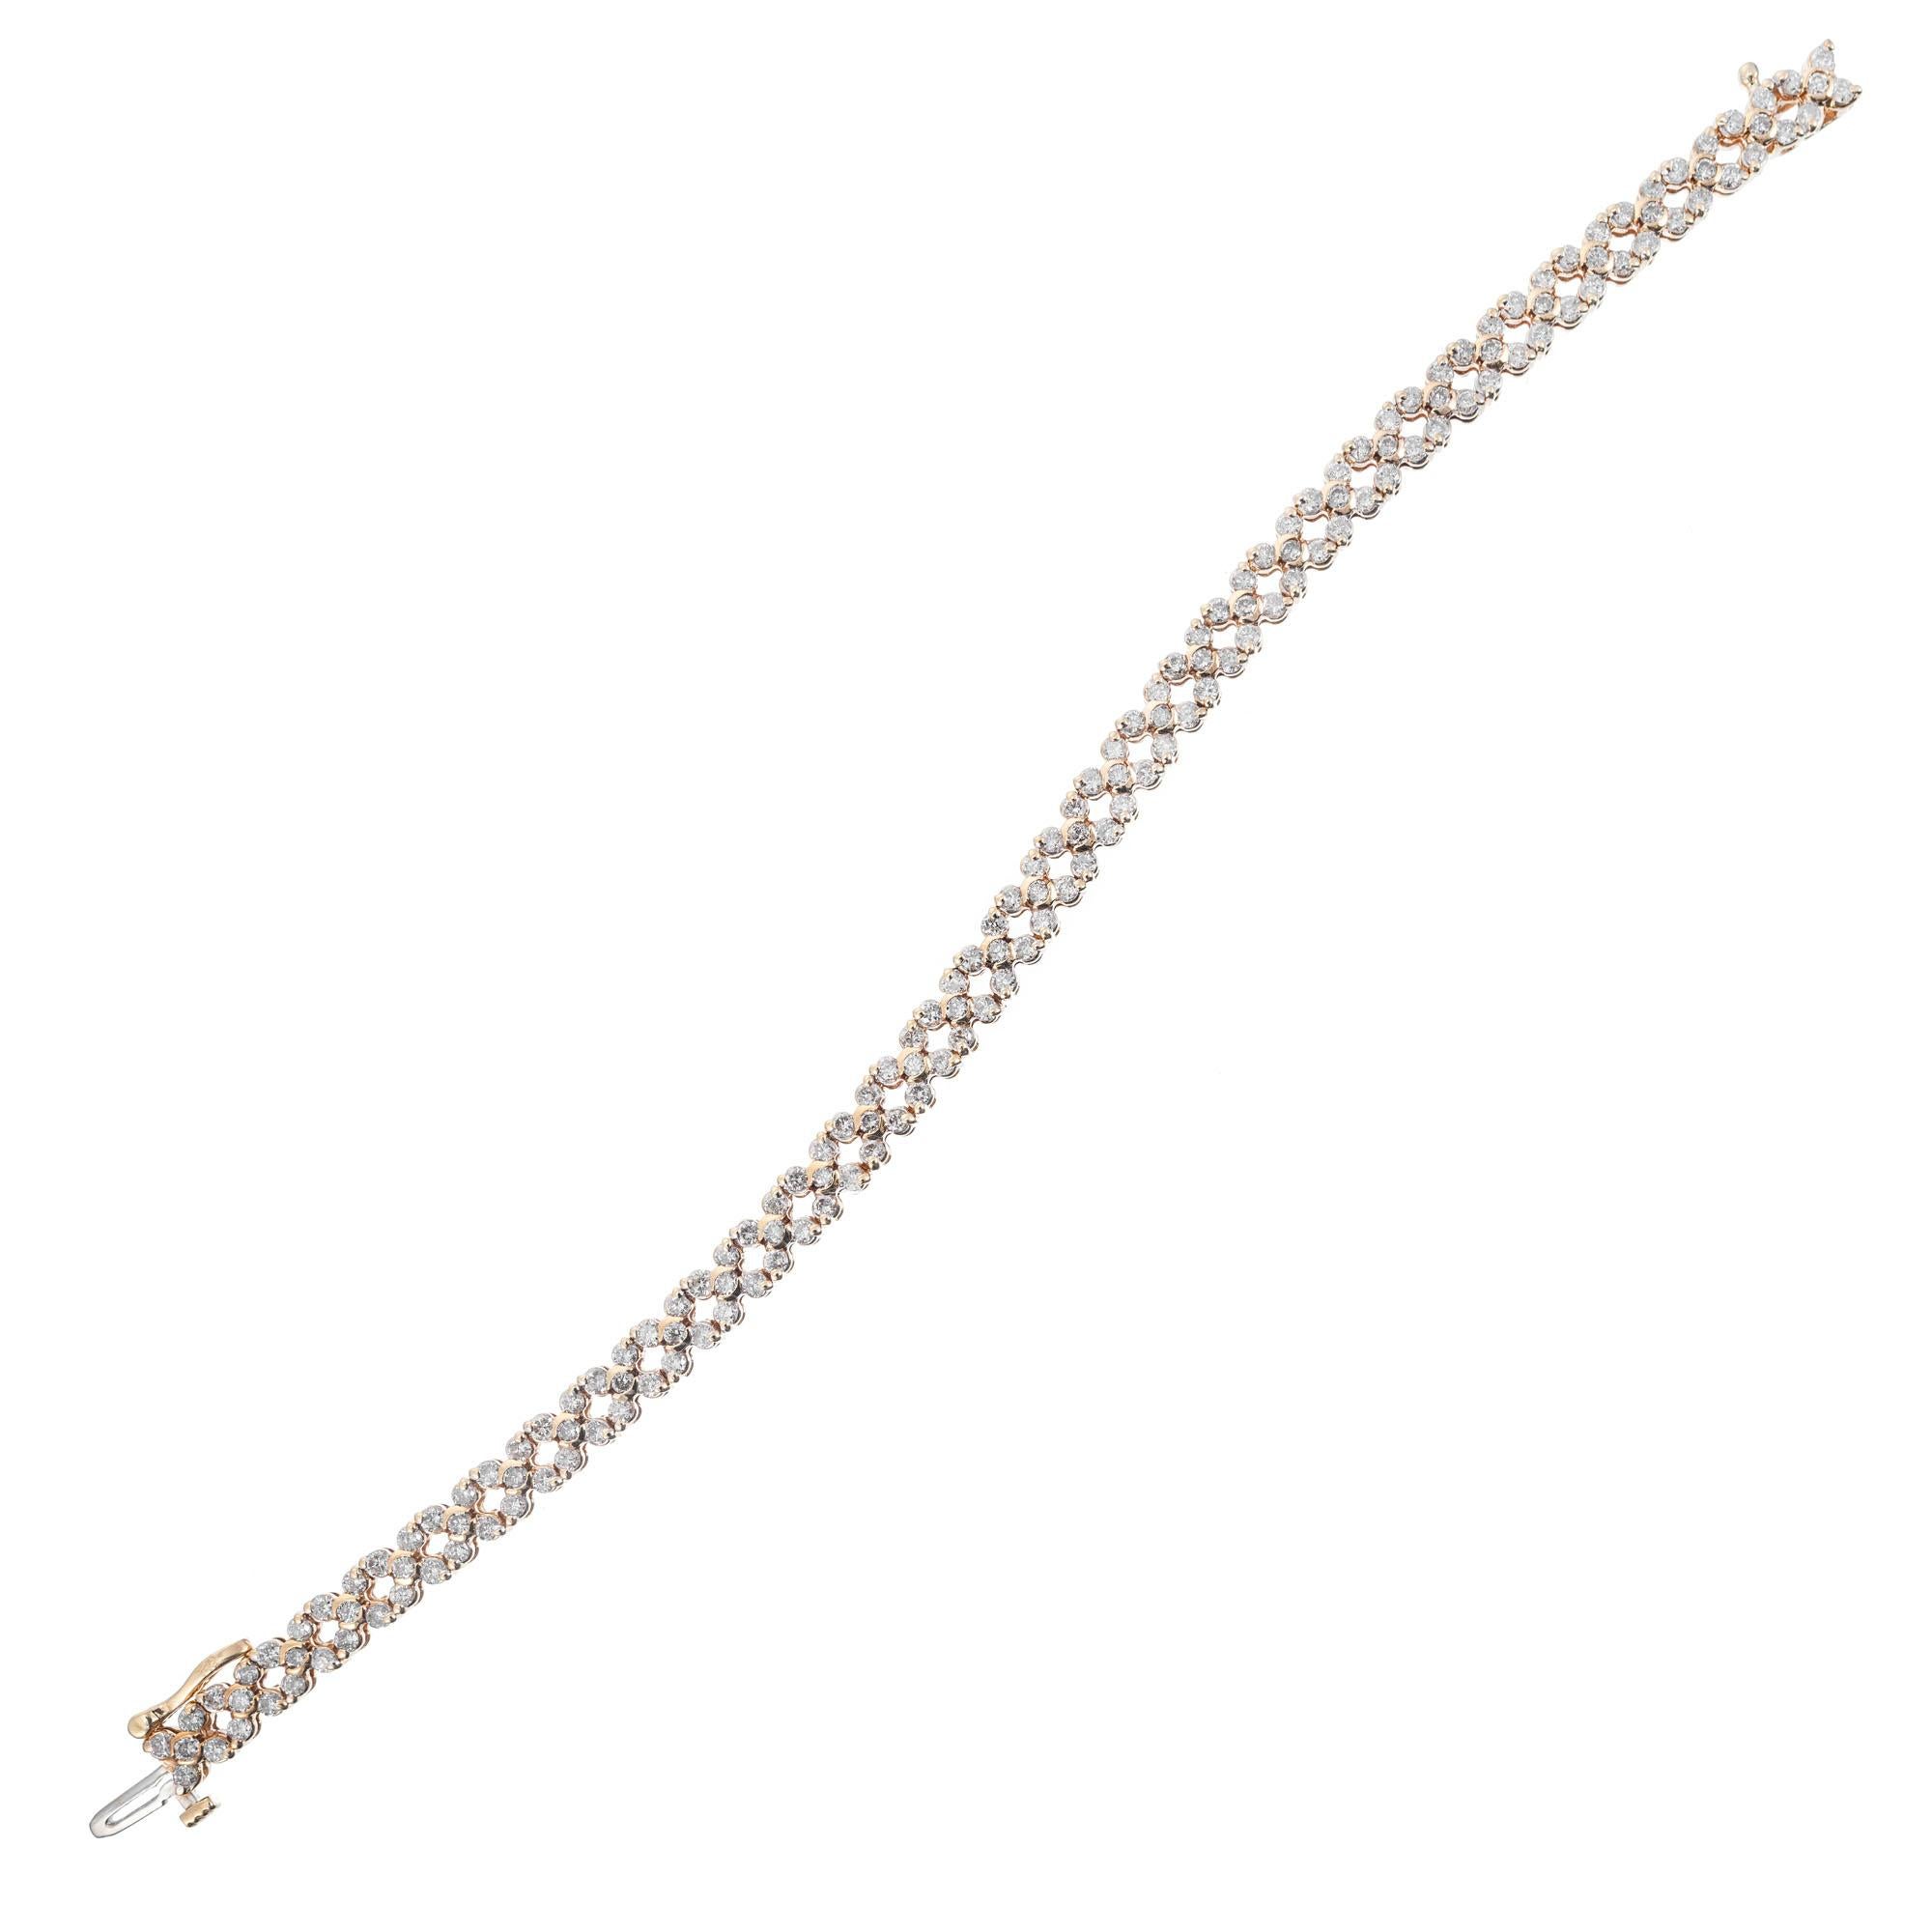 Diamond star yellow gold bracelet. 170 round diamonds set in a 14k yellow gold star design hinged link bracelet. Hidden built in catch and side lock safety. 7 inches in length. 

170 round diamonds, approx. total weight 3.00cts, H-I, SI
14k yellow